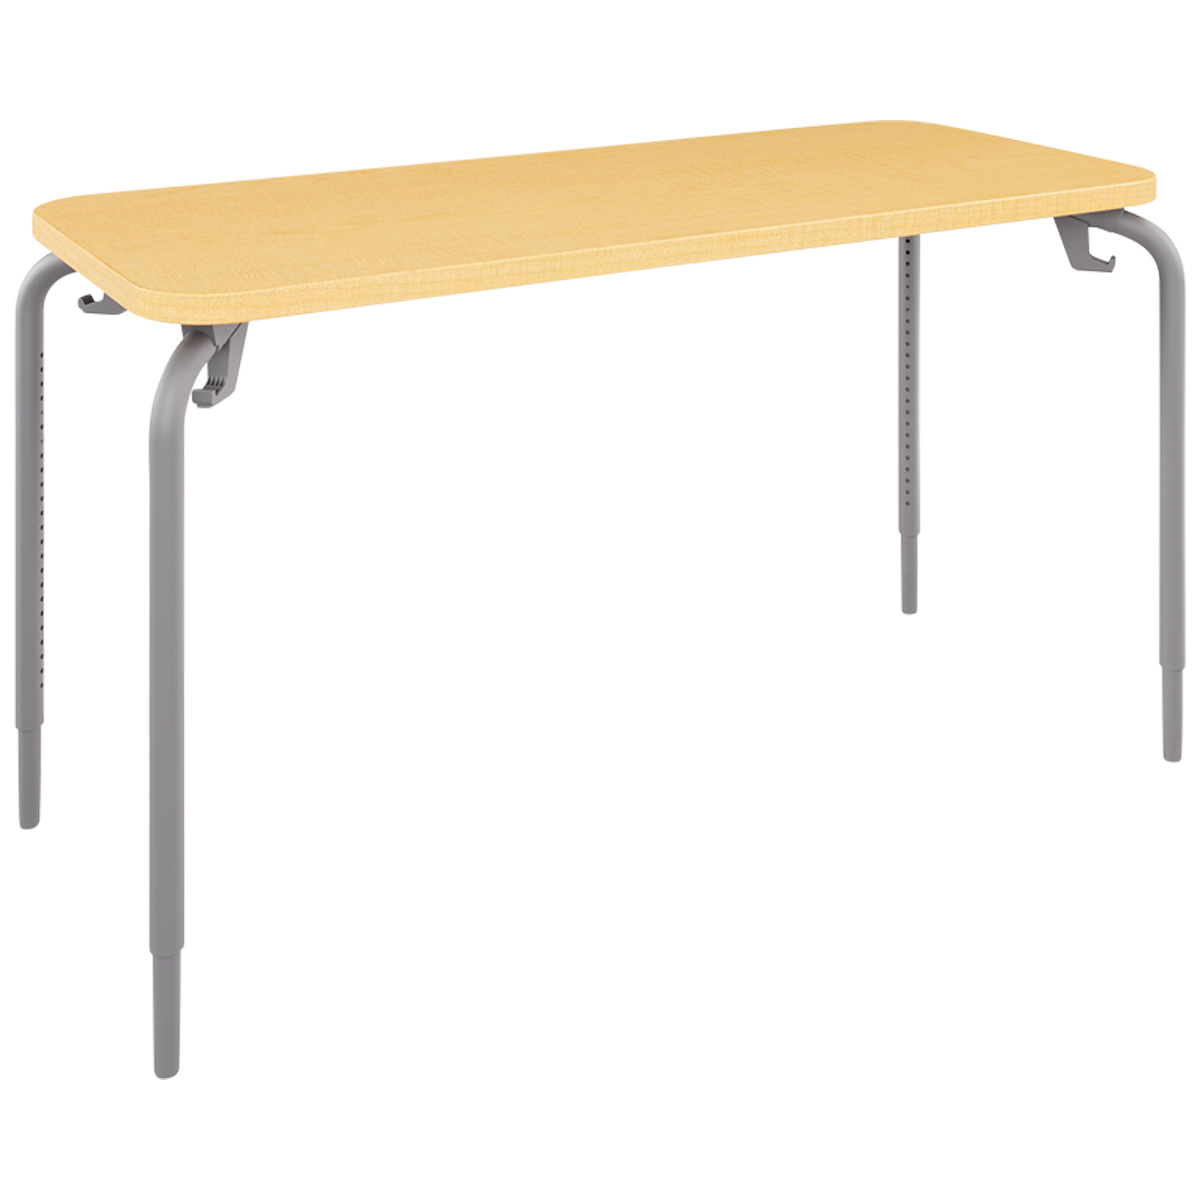 Numbers High Range Two-Student Desk 24x54